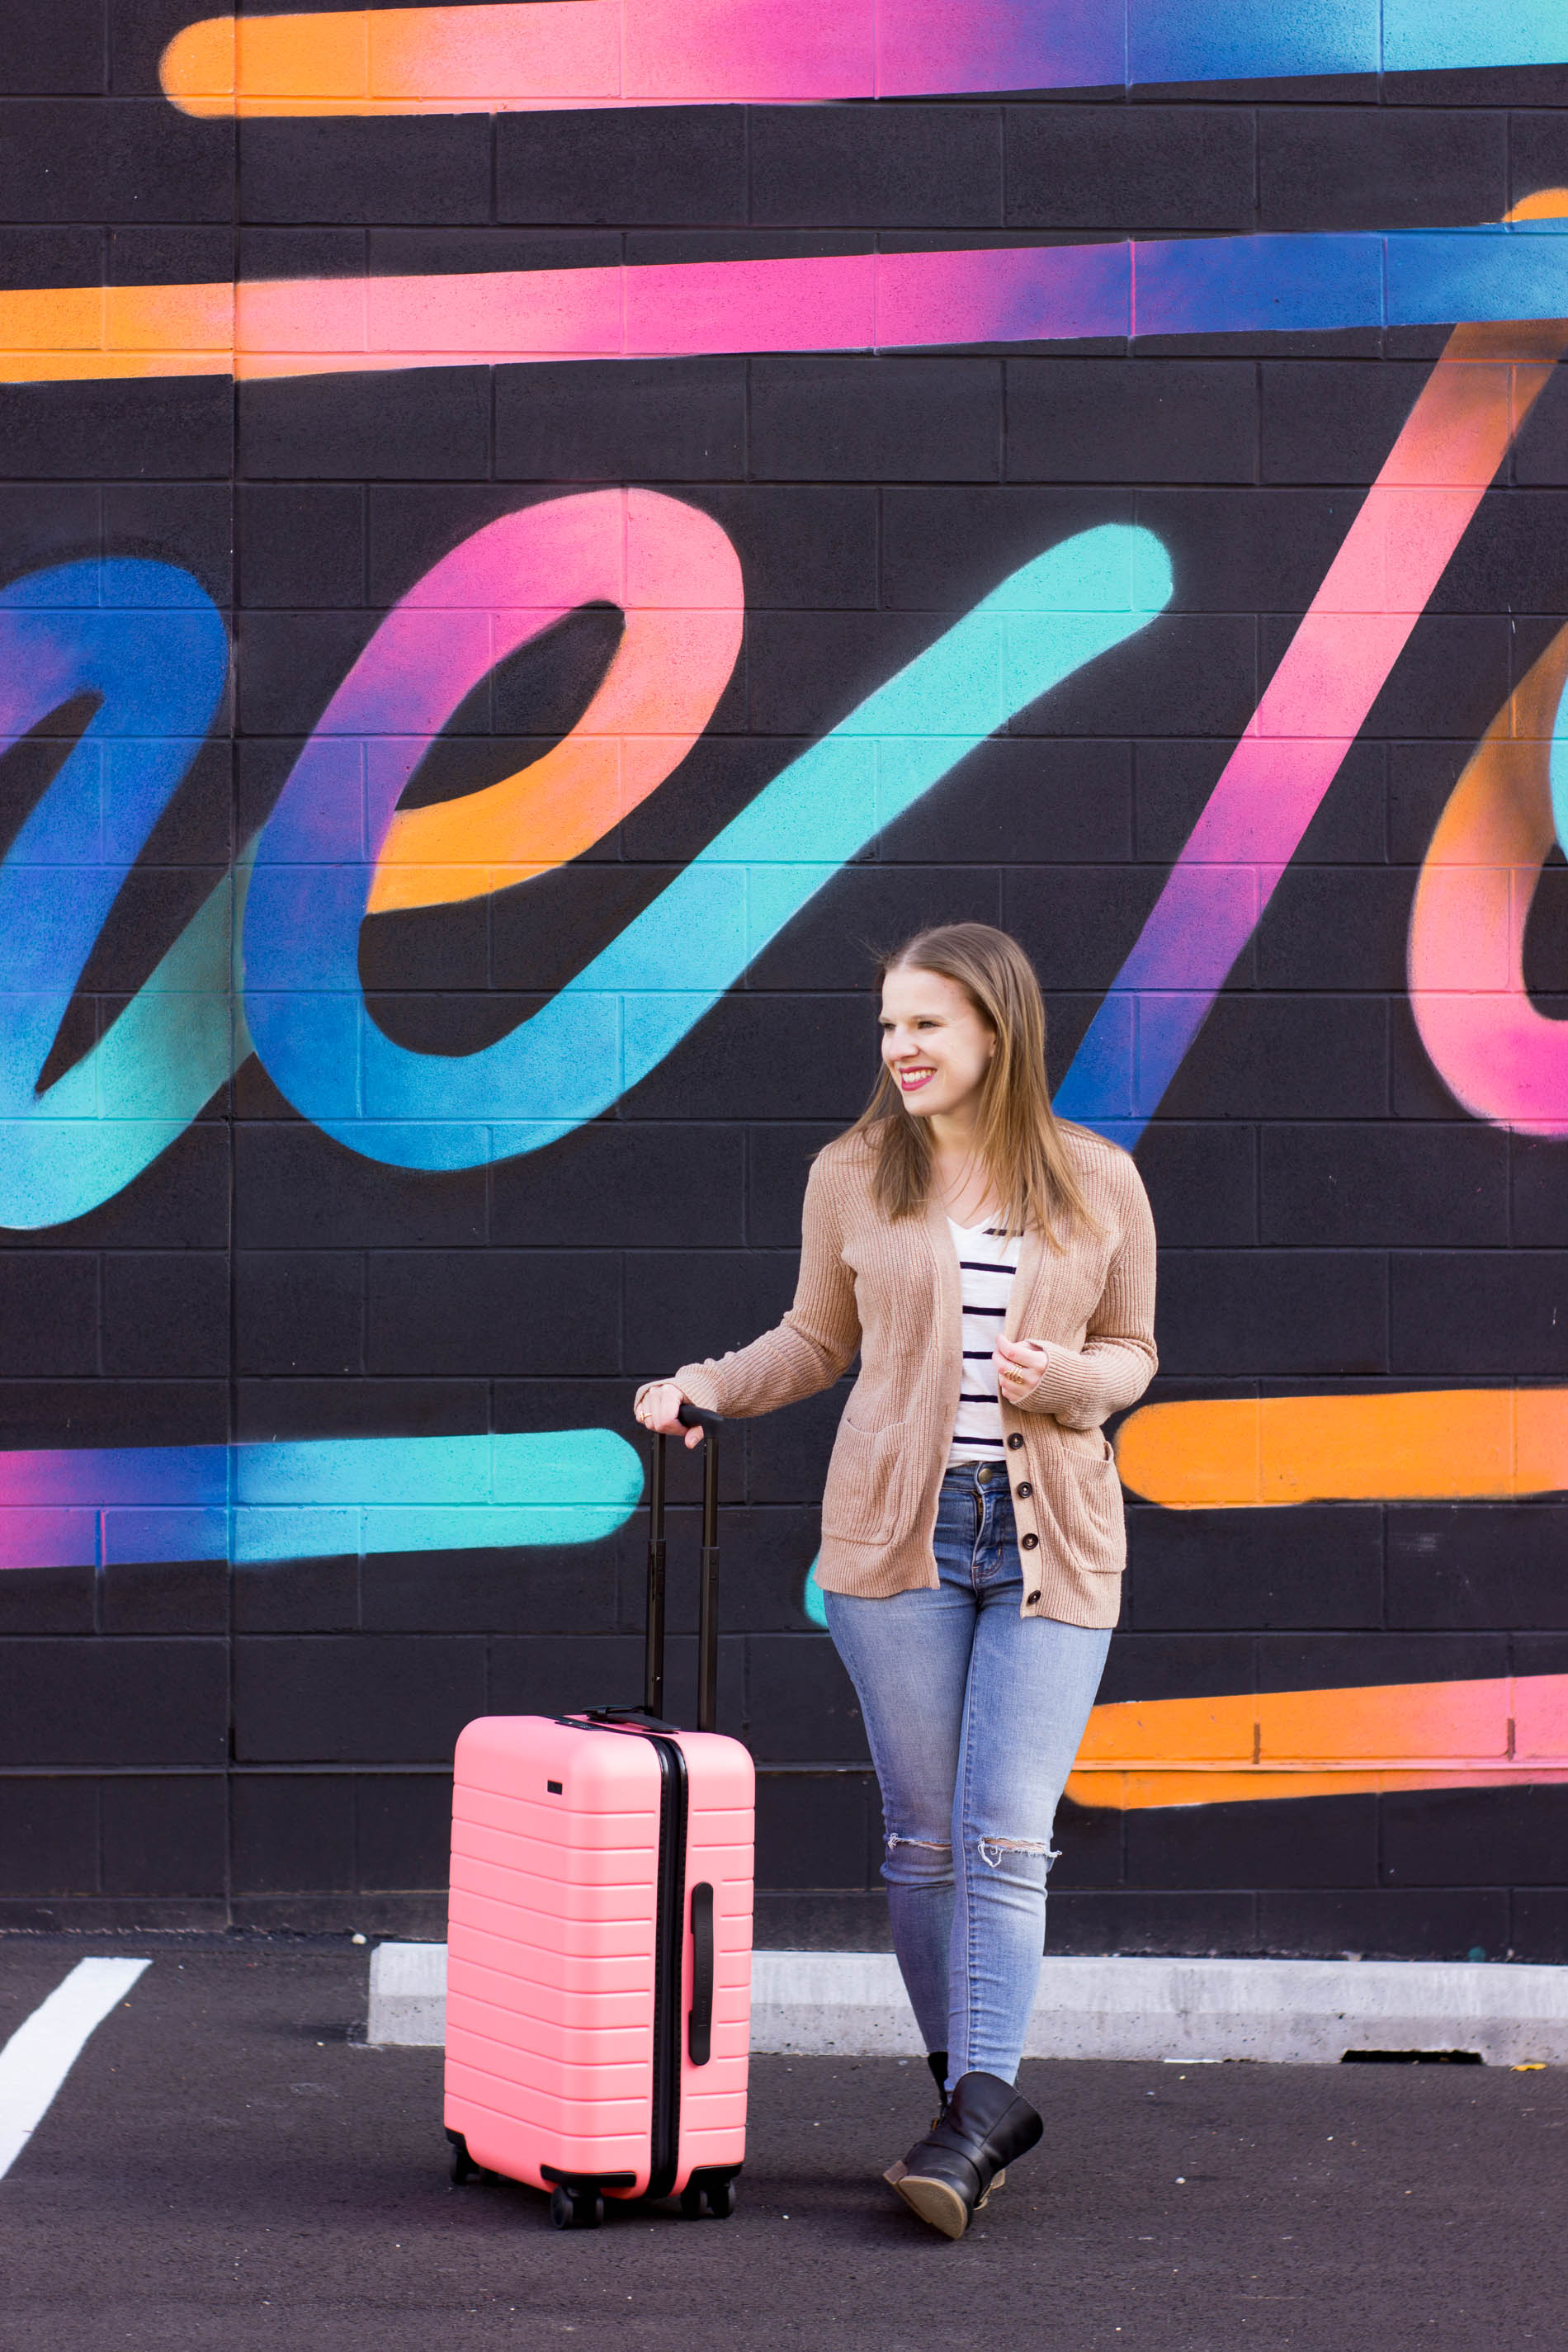 The Perfect Travel Outfit | Something Good, @danaerinw , women, fashion, clothing, style, women's fashion, jeggings, american eagle outfitters, jeans, denim, ripped jeans, boyfriend cardigan, striped shirt, coral suitcase